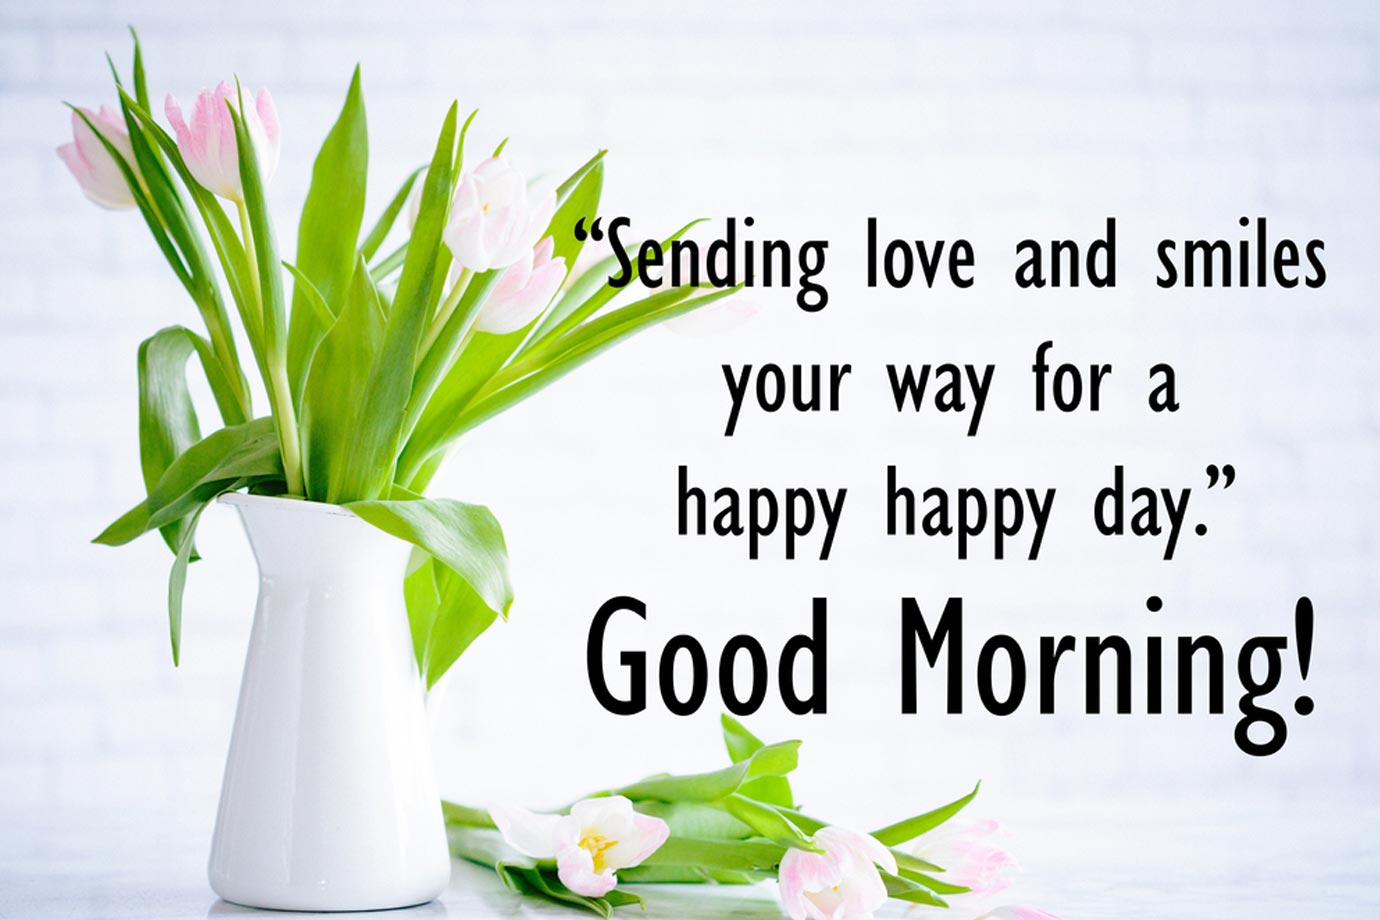 Good Morning Messages And Quotes: Say Good Morning To Your Friends And Family With These Unique Messages | HerZindagi